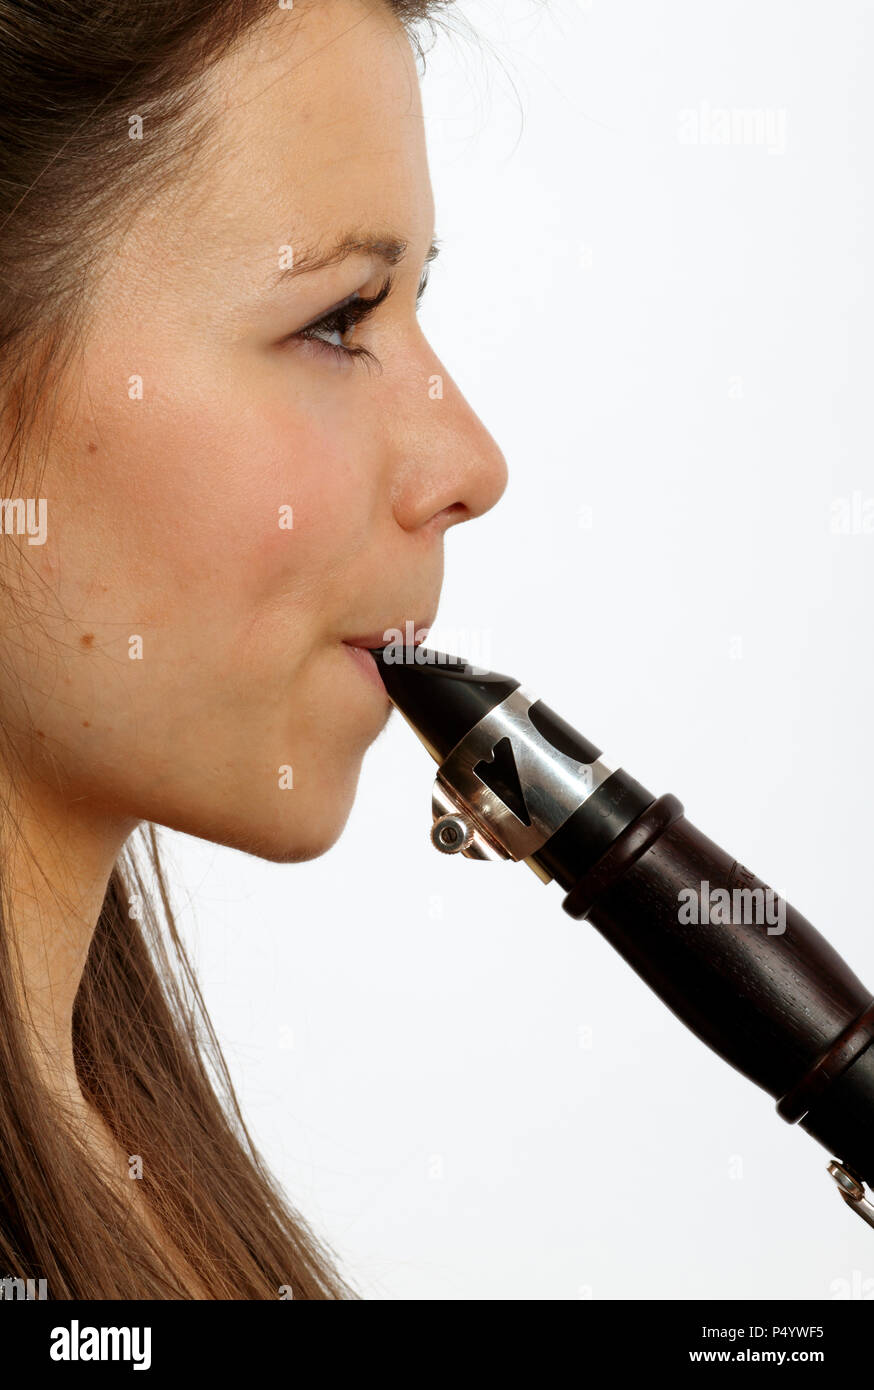 https://c8.alamy.com/comp/P4YWF5/close-up-detail-of-clarinet-mouthpiece-and-embouchure-P4YWF5.jpg